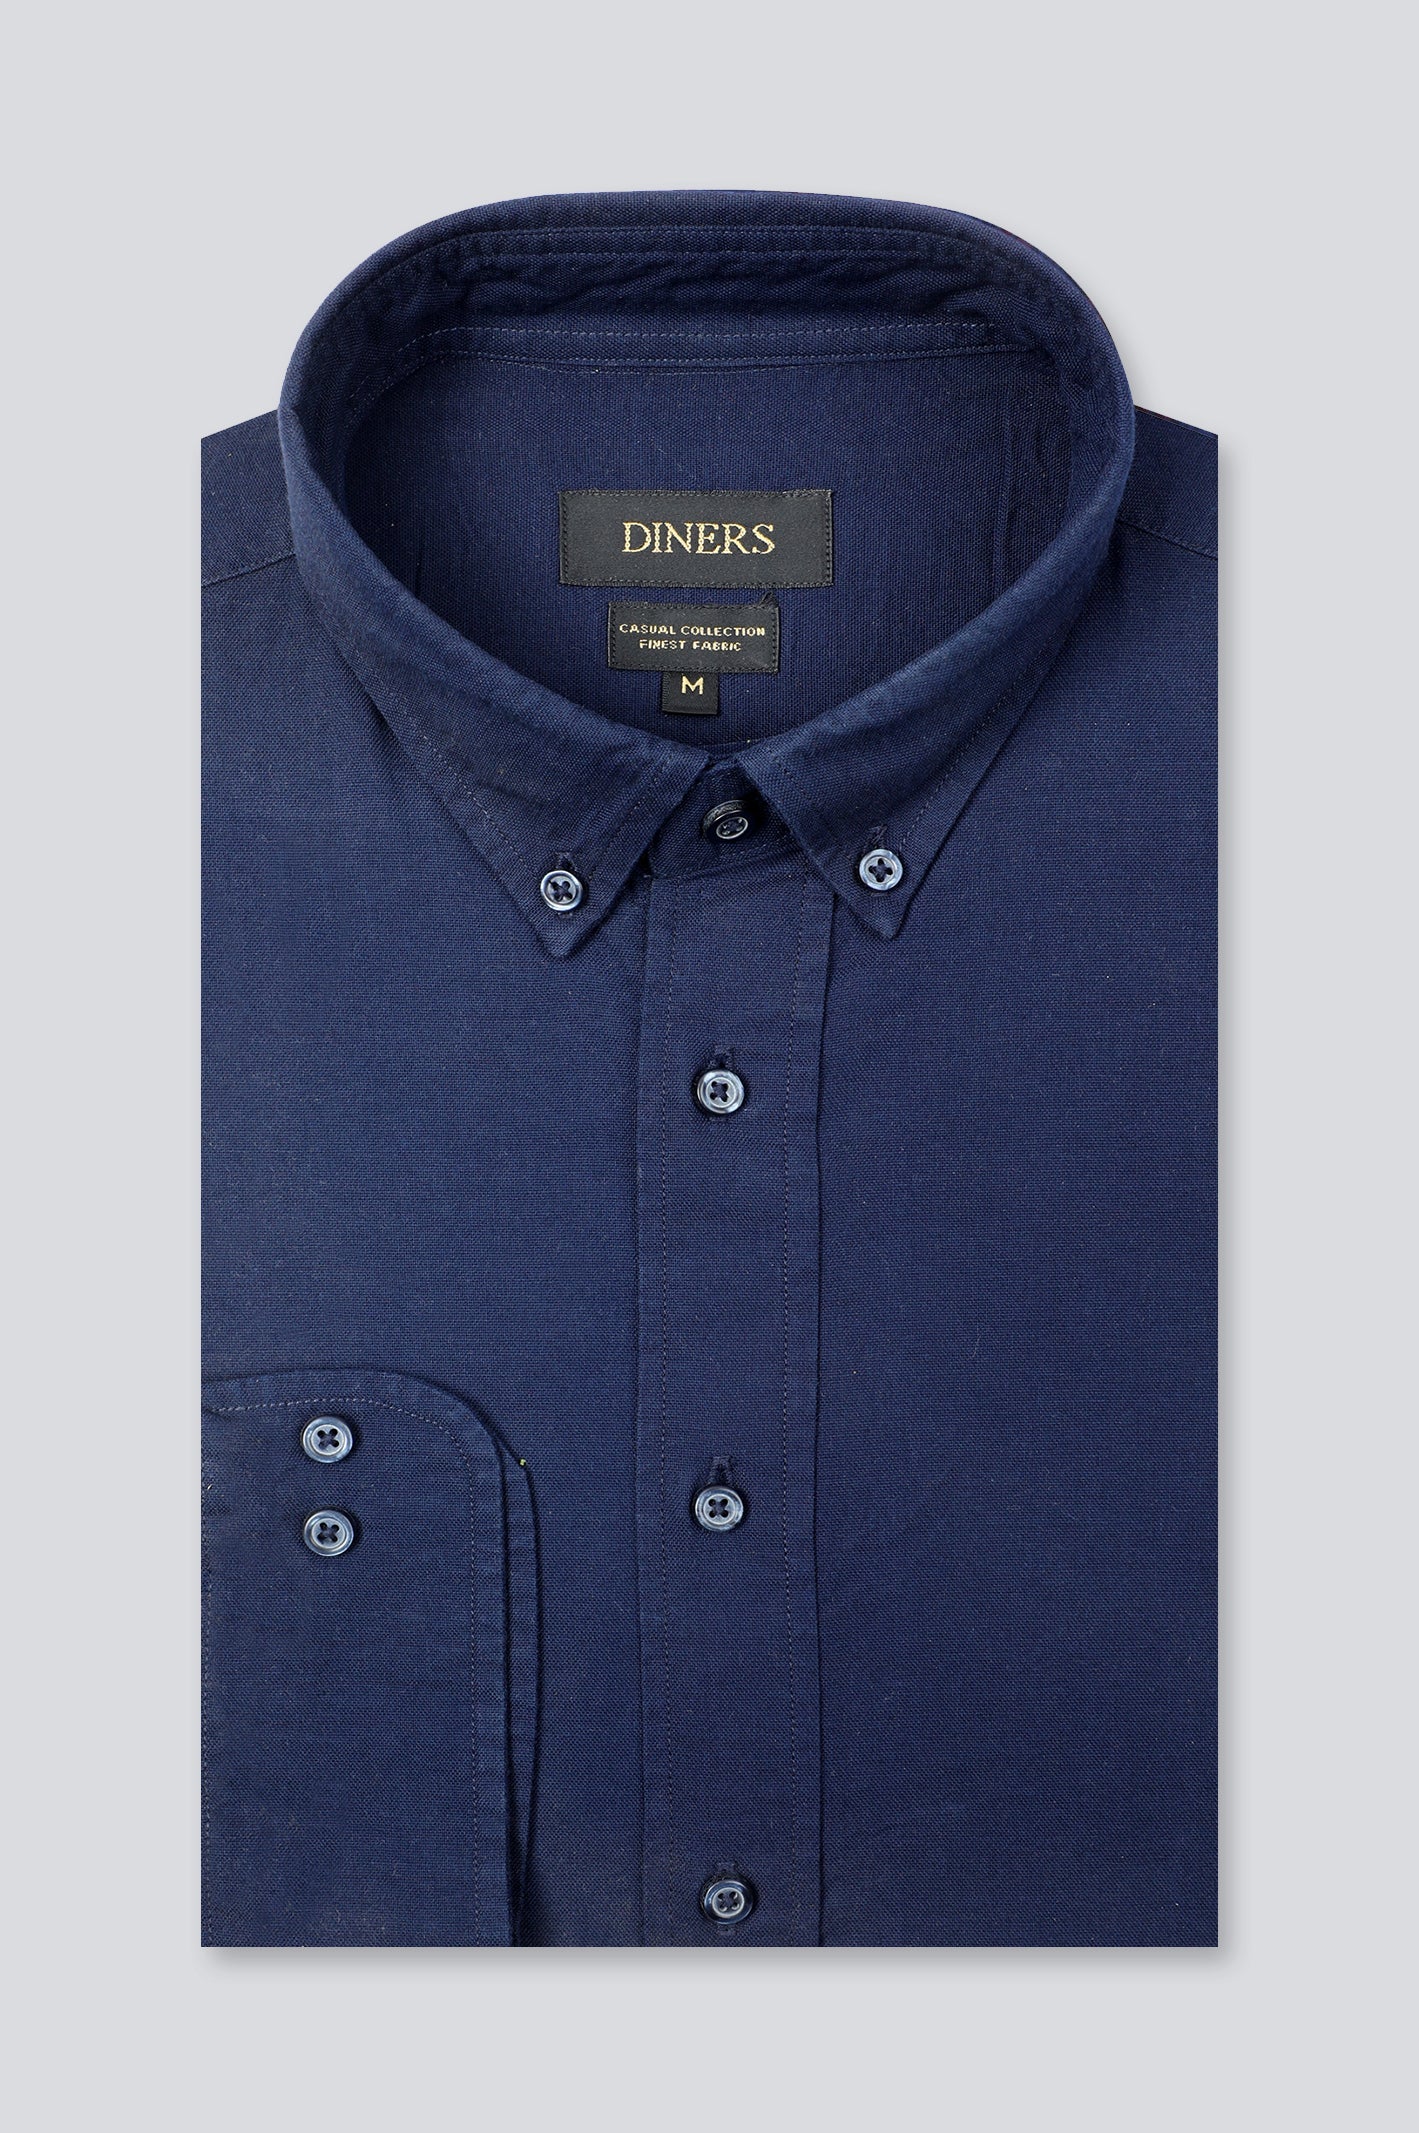 Navy Blue Plain Casual Shirt - Diners